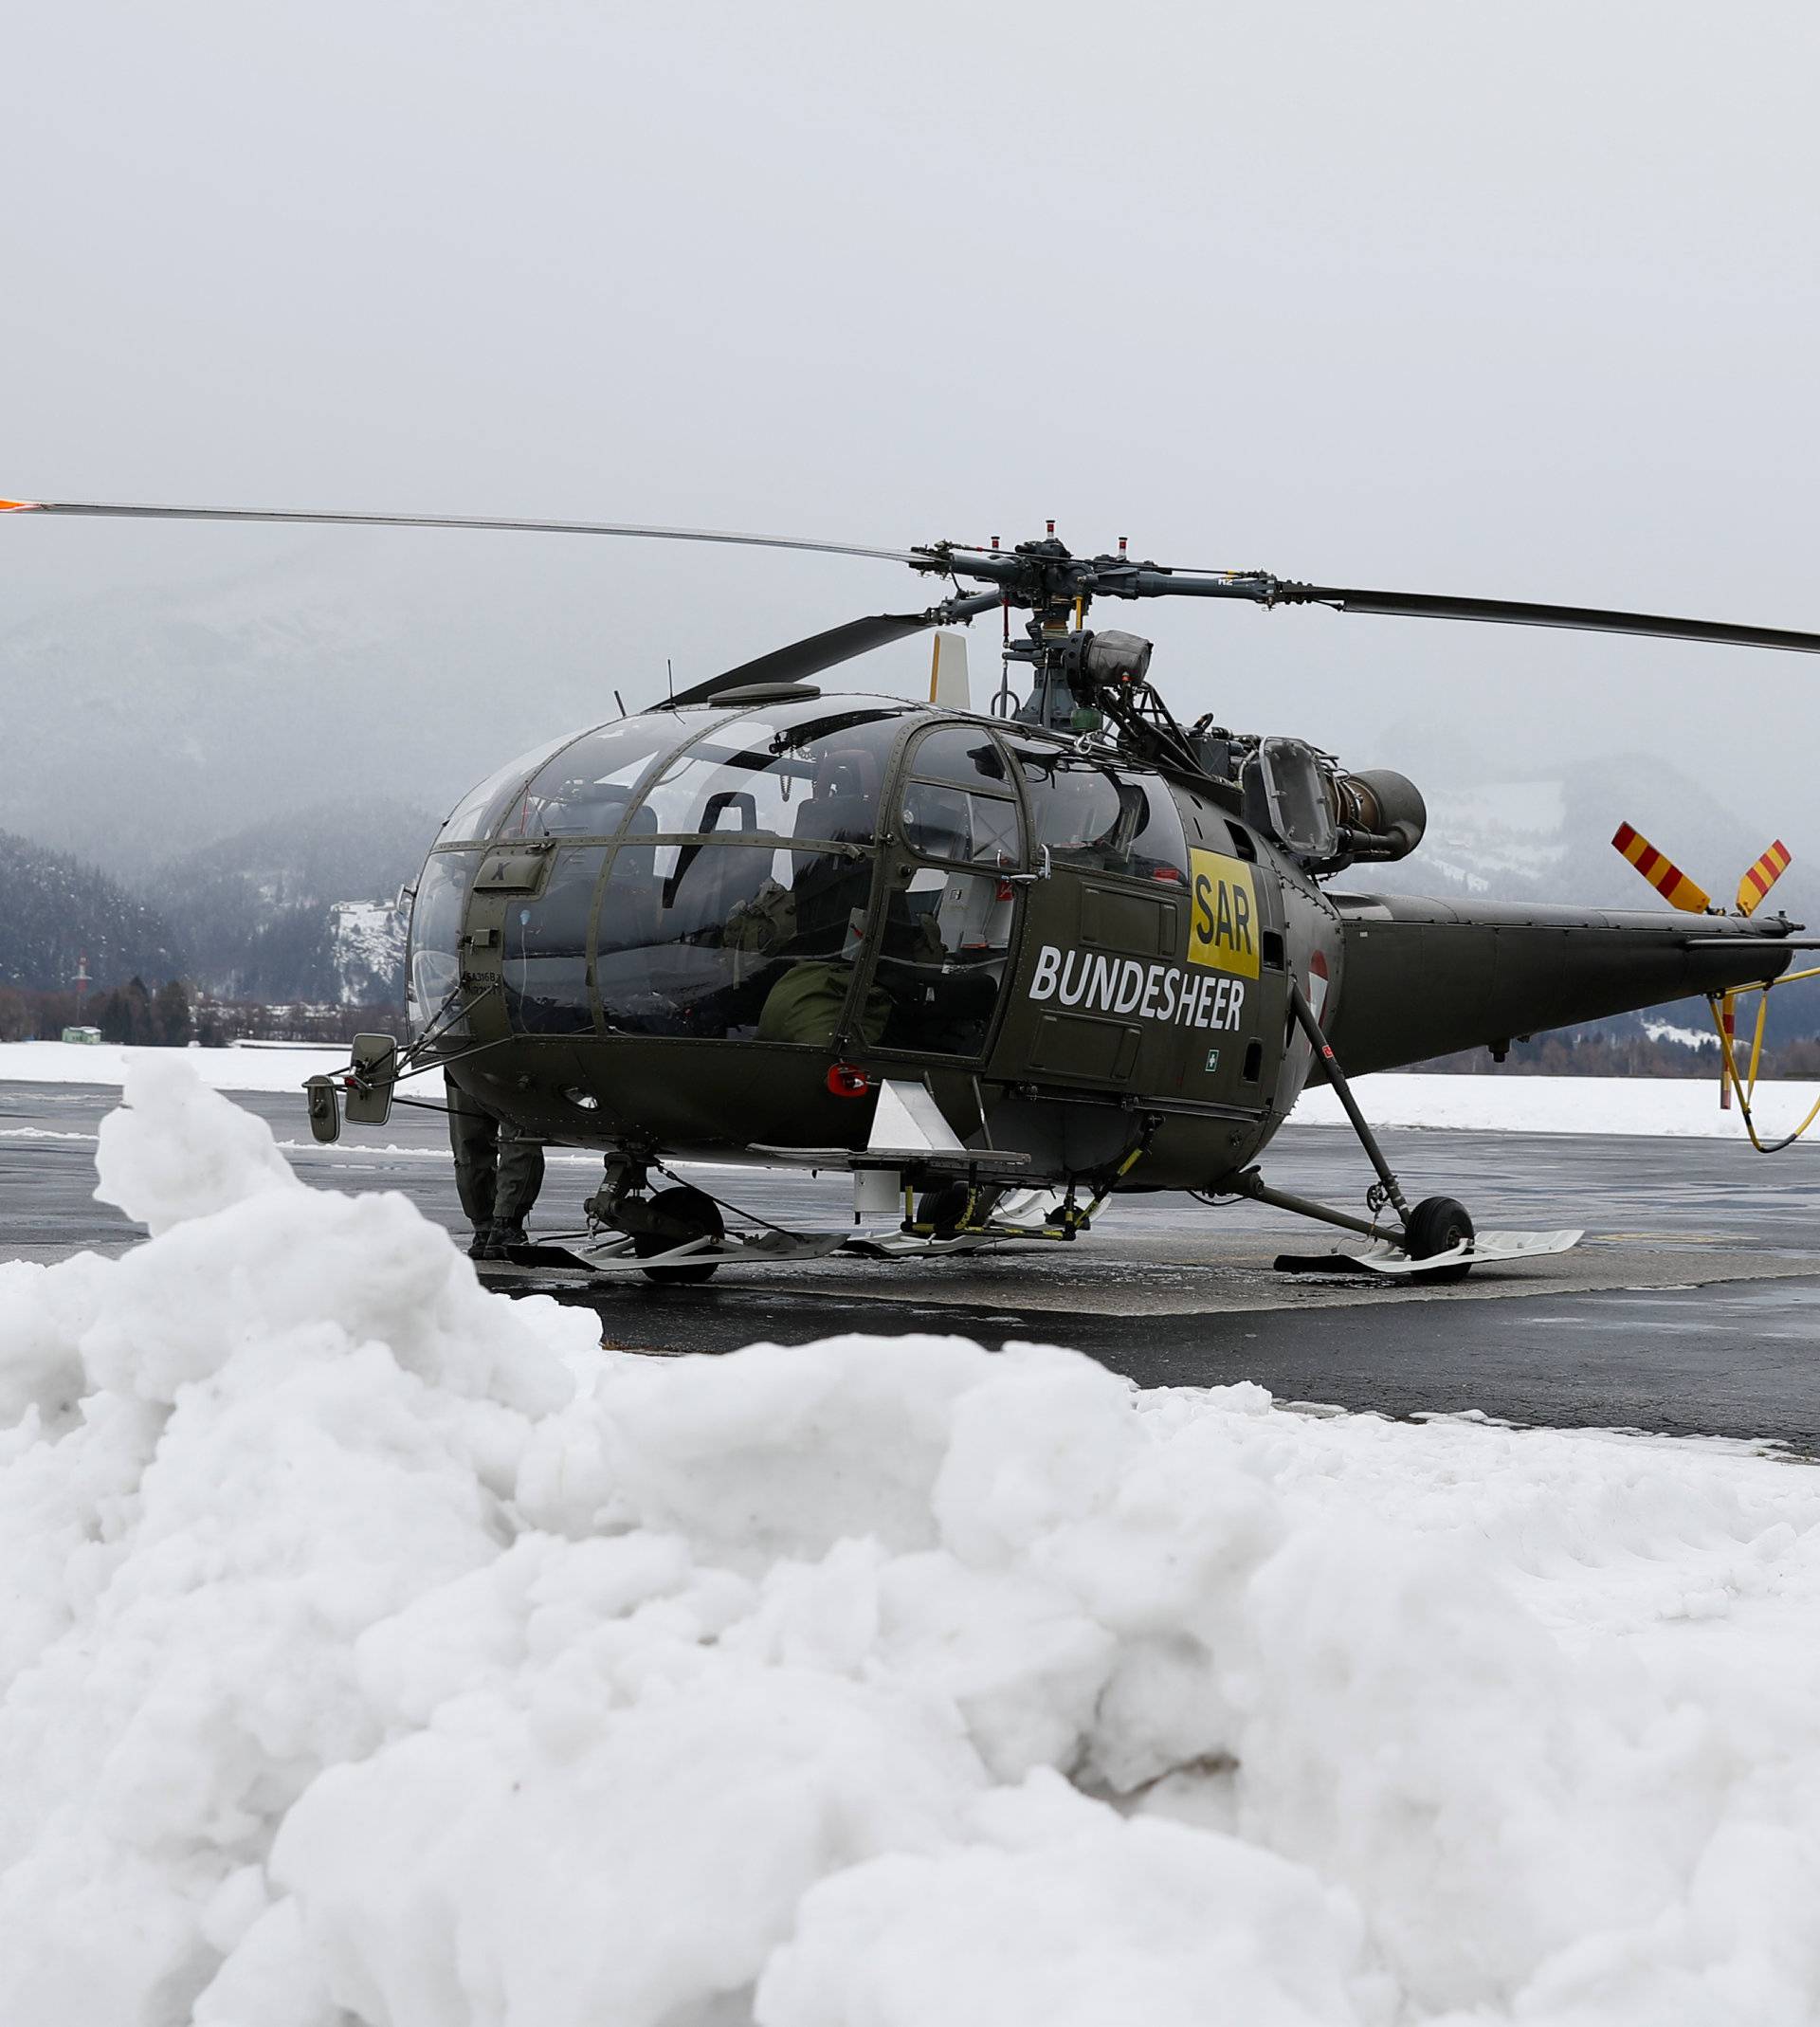 An Austrian army helicopter stands outside a military barrack in Aigen